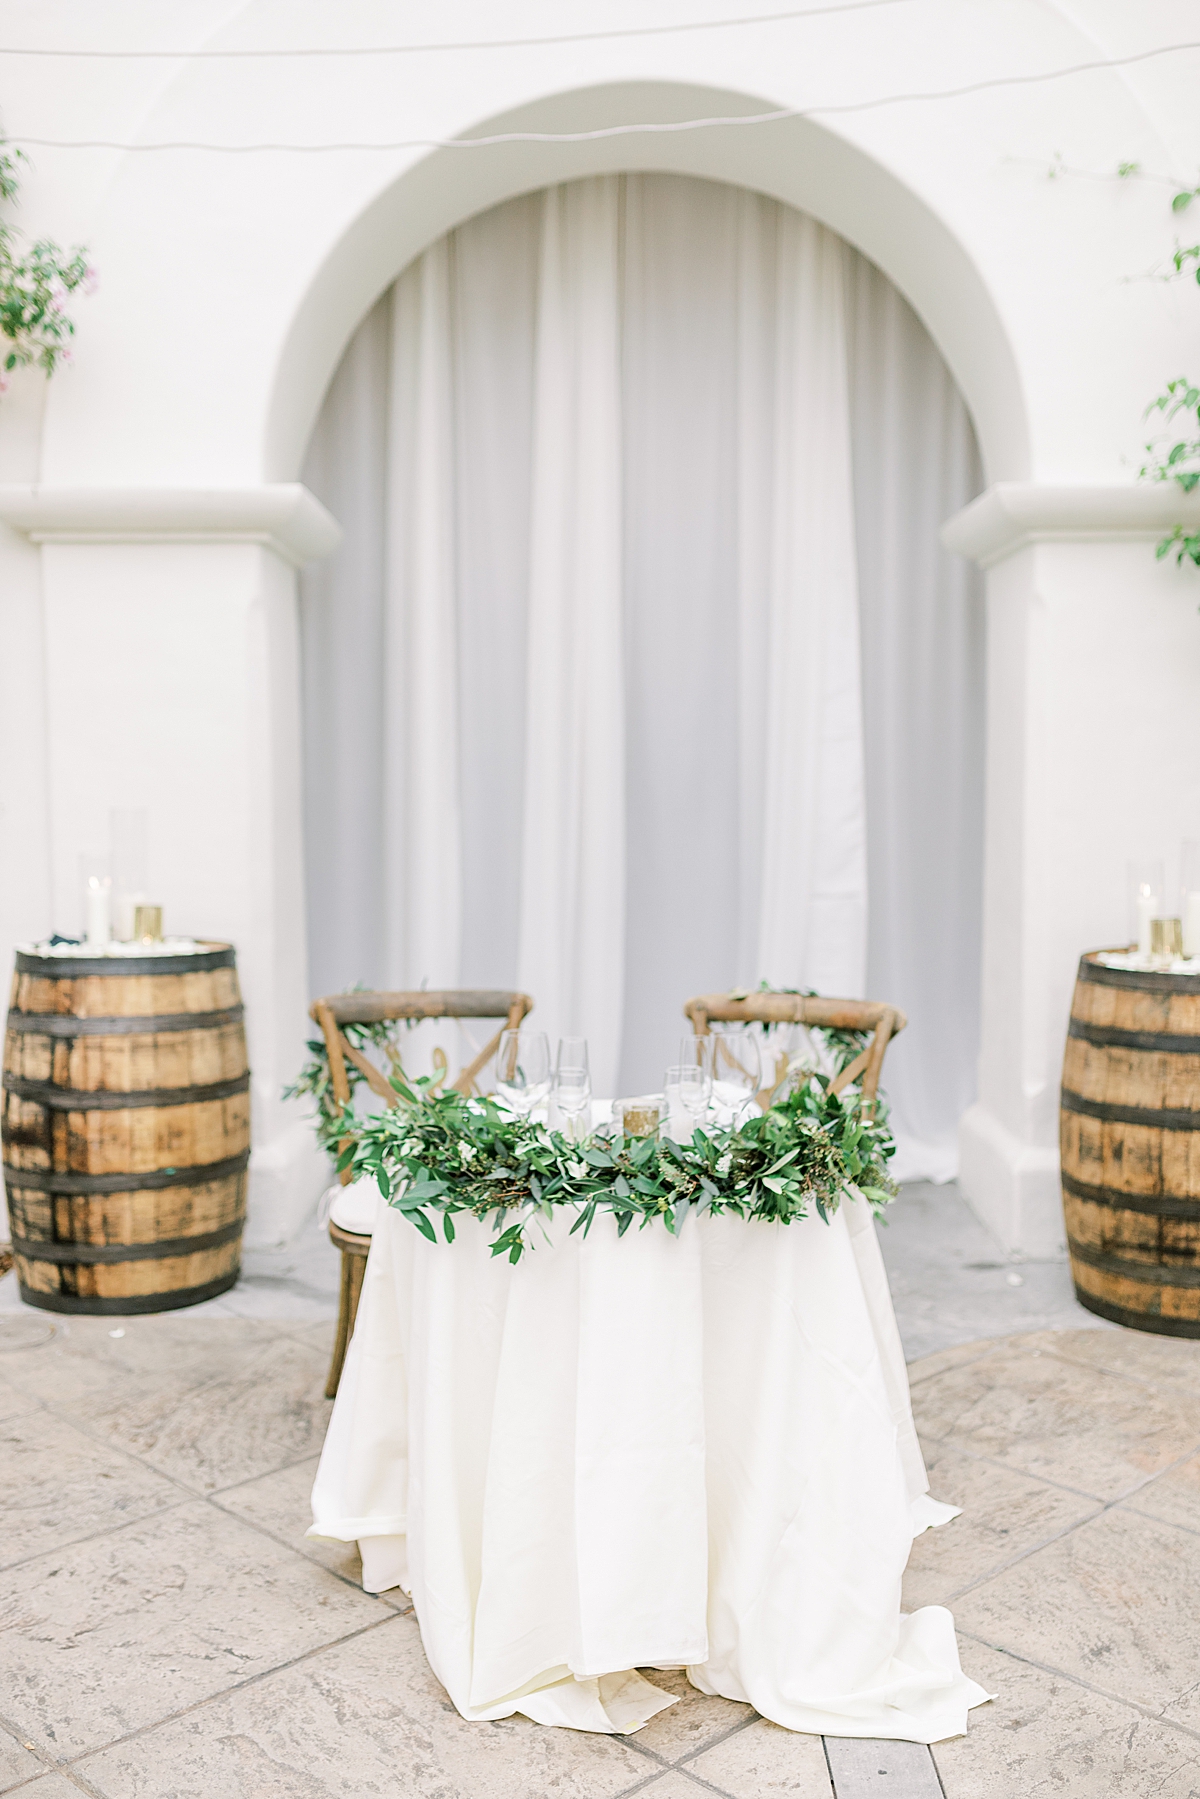 The couple's sweetheart table centered between two wine barrels.